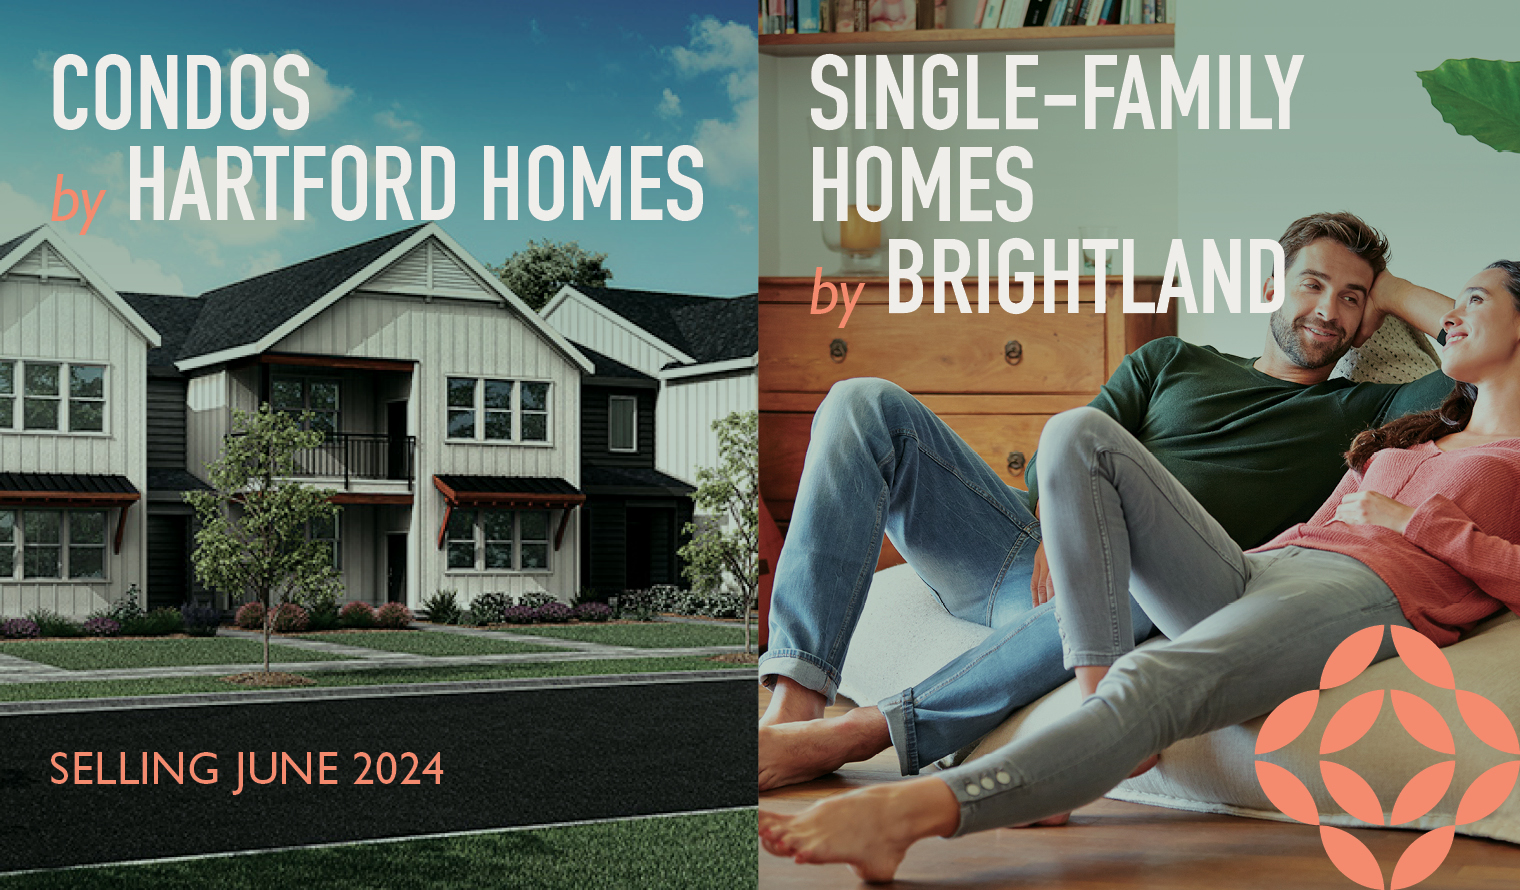 Start Shopping New Homes and Experience the Bloom Lifestyle in Fort Collins